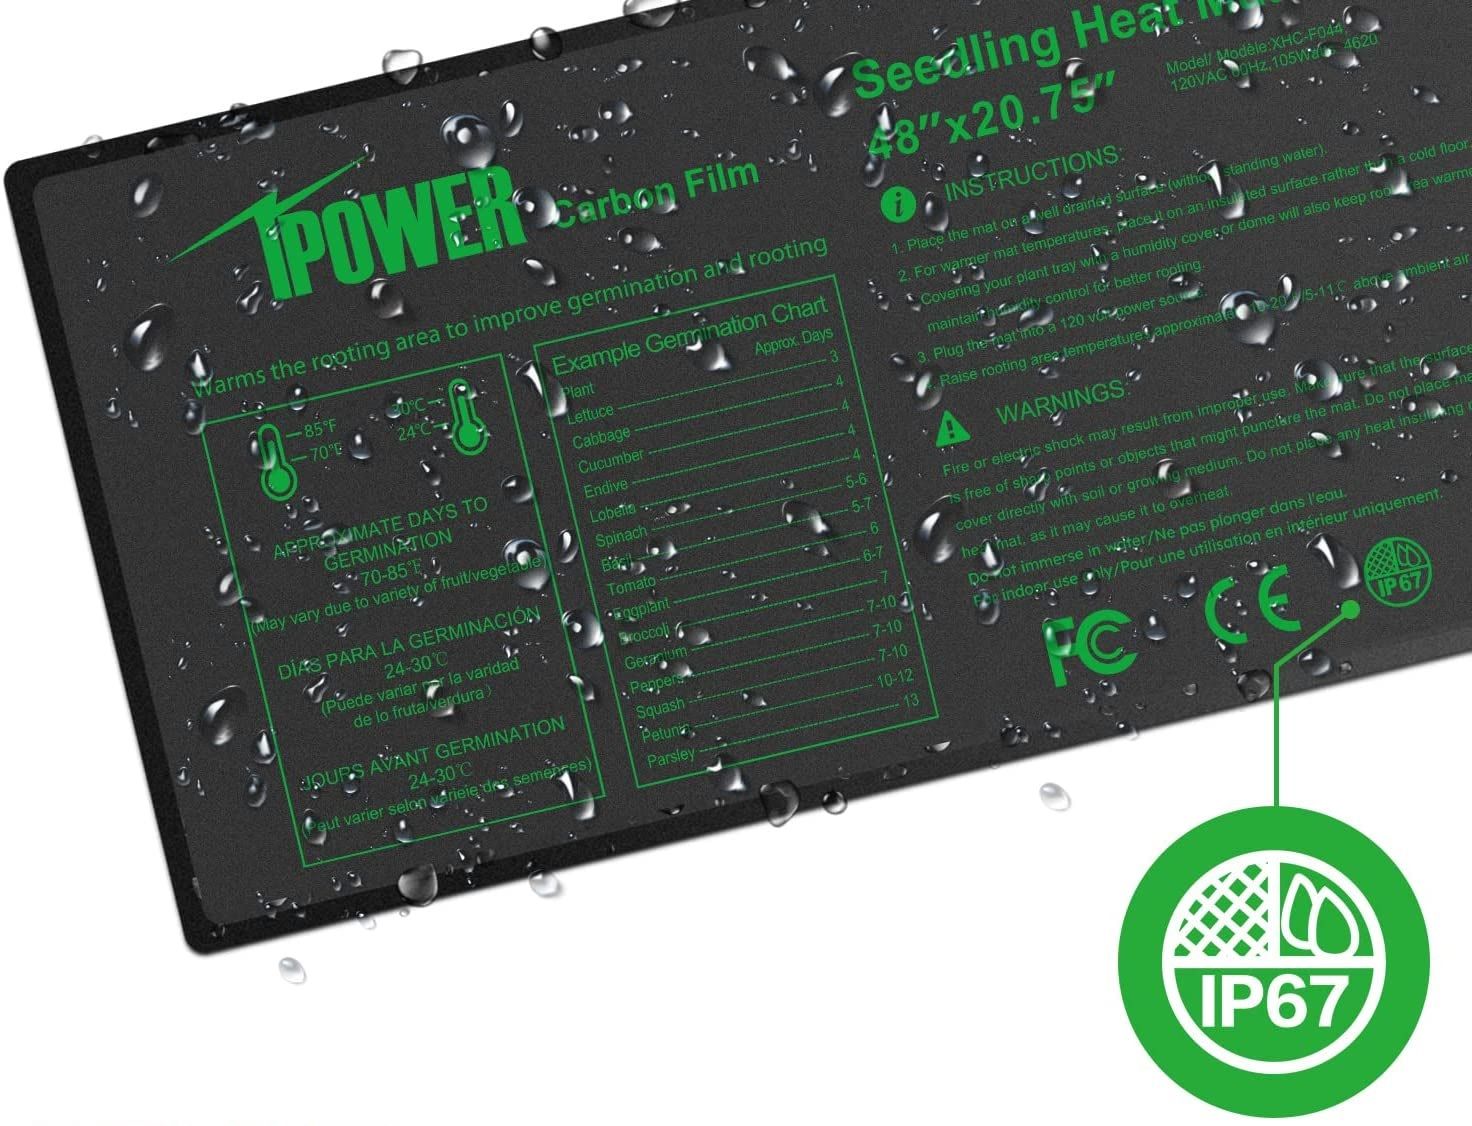 the ipower seedling heat mat covered in droplets of water